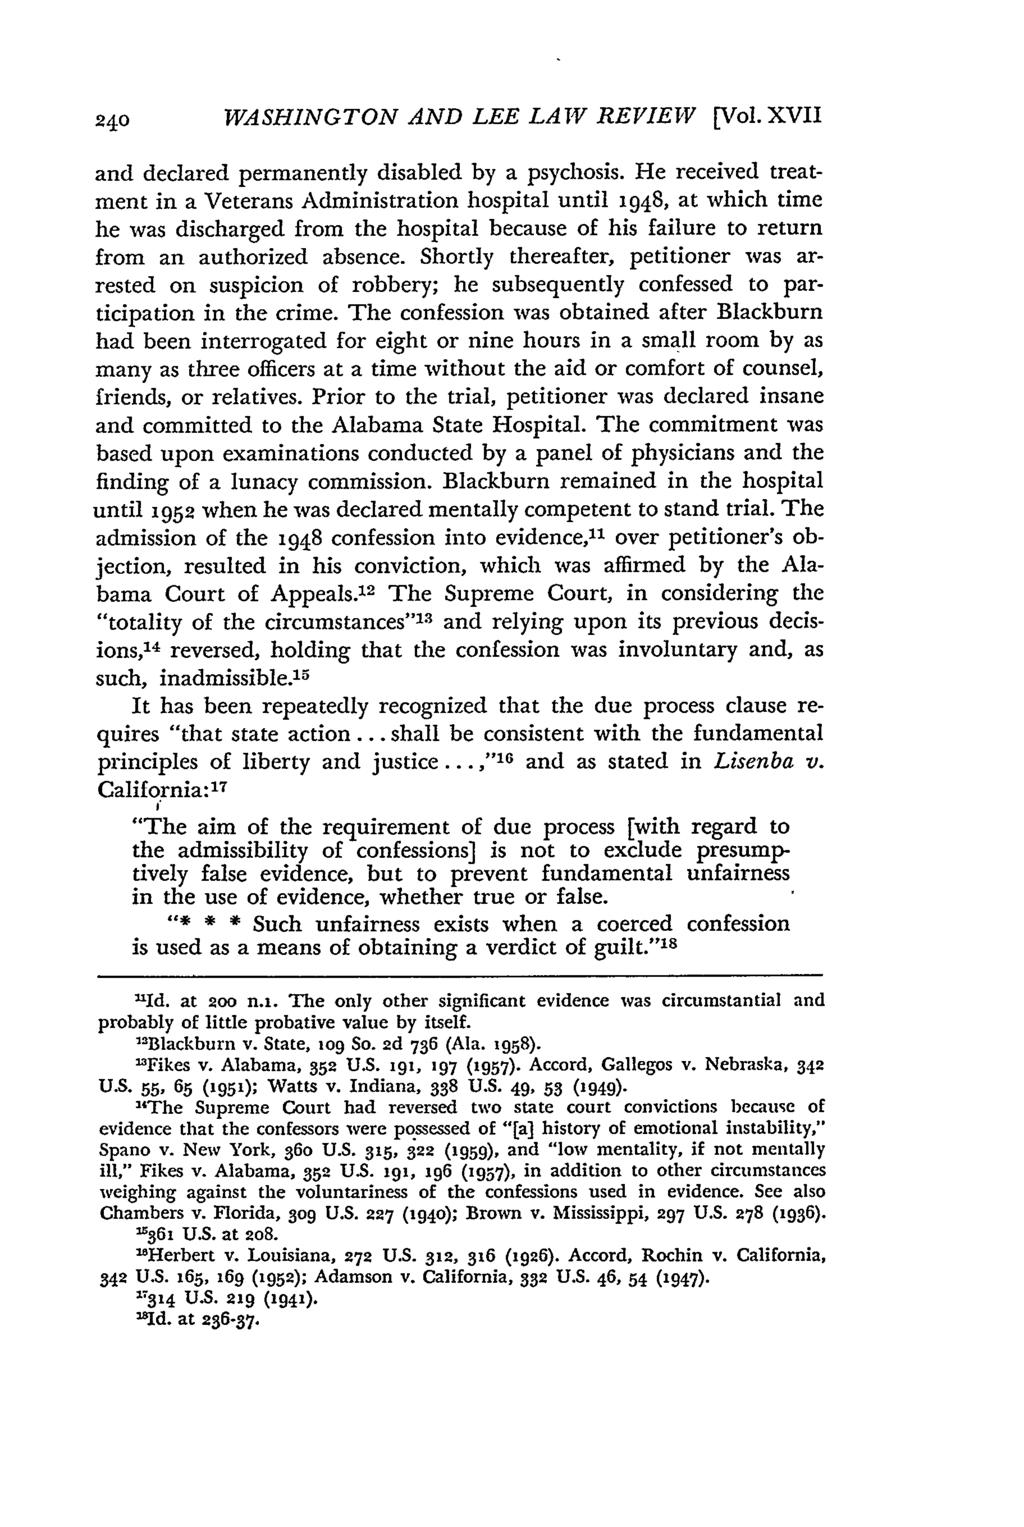 240 WASHINGTON AND LEE LAW REVIEW [Vol. XVII and declared permanently disabled by a psychosis.